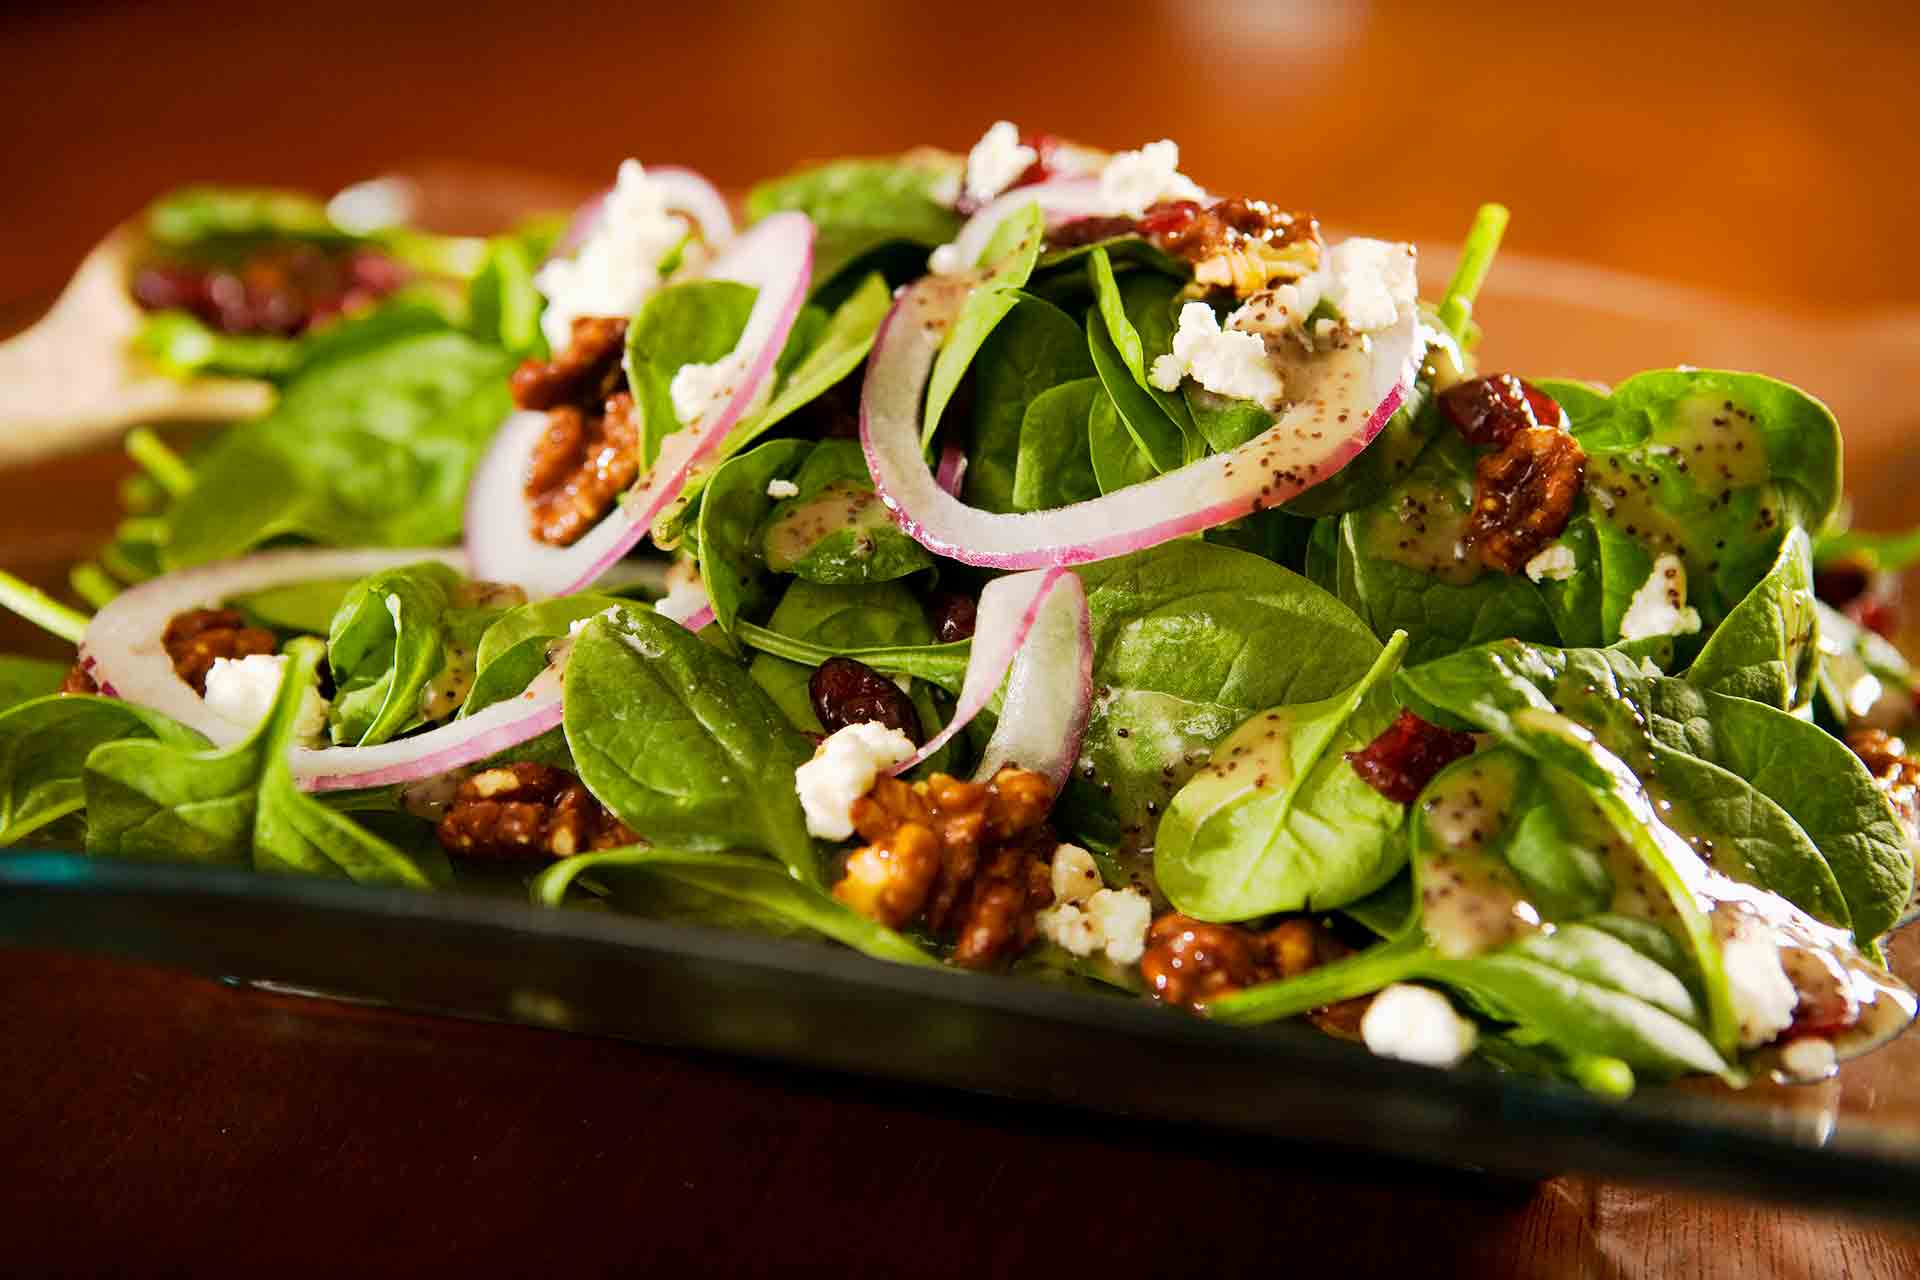 Spinach Salad with Goat Cheese